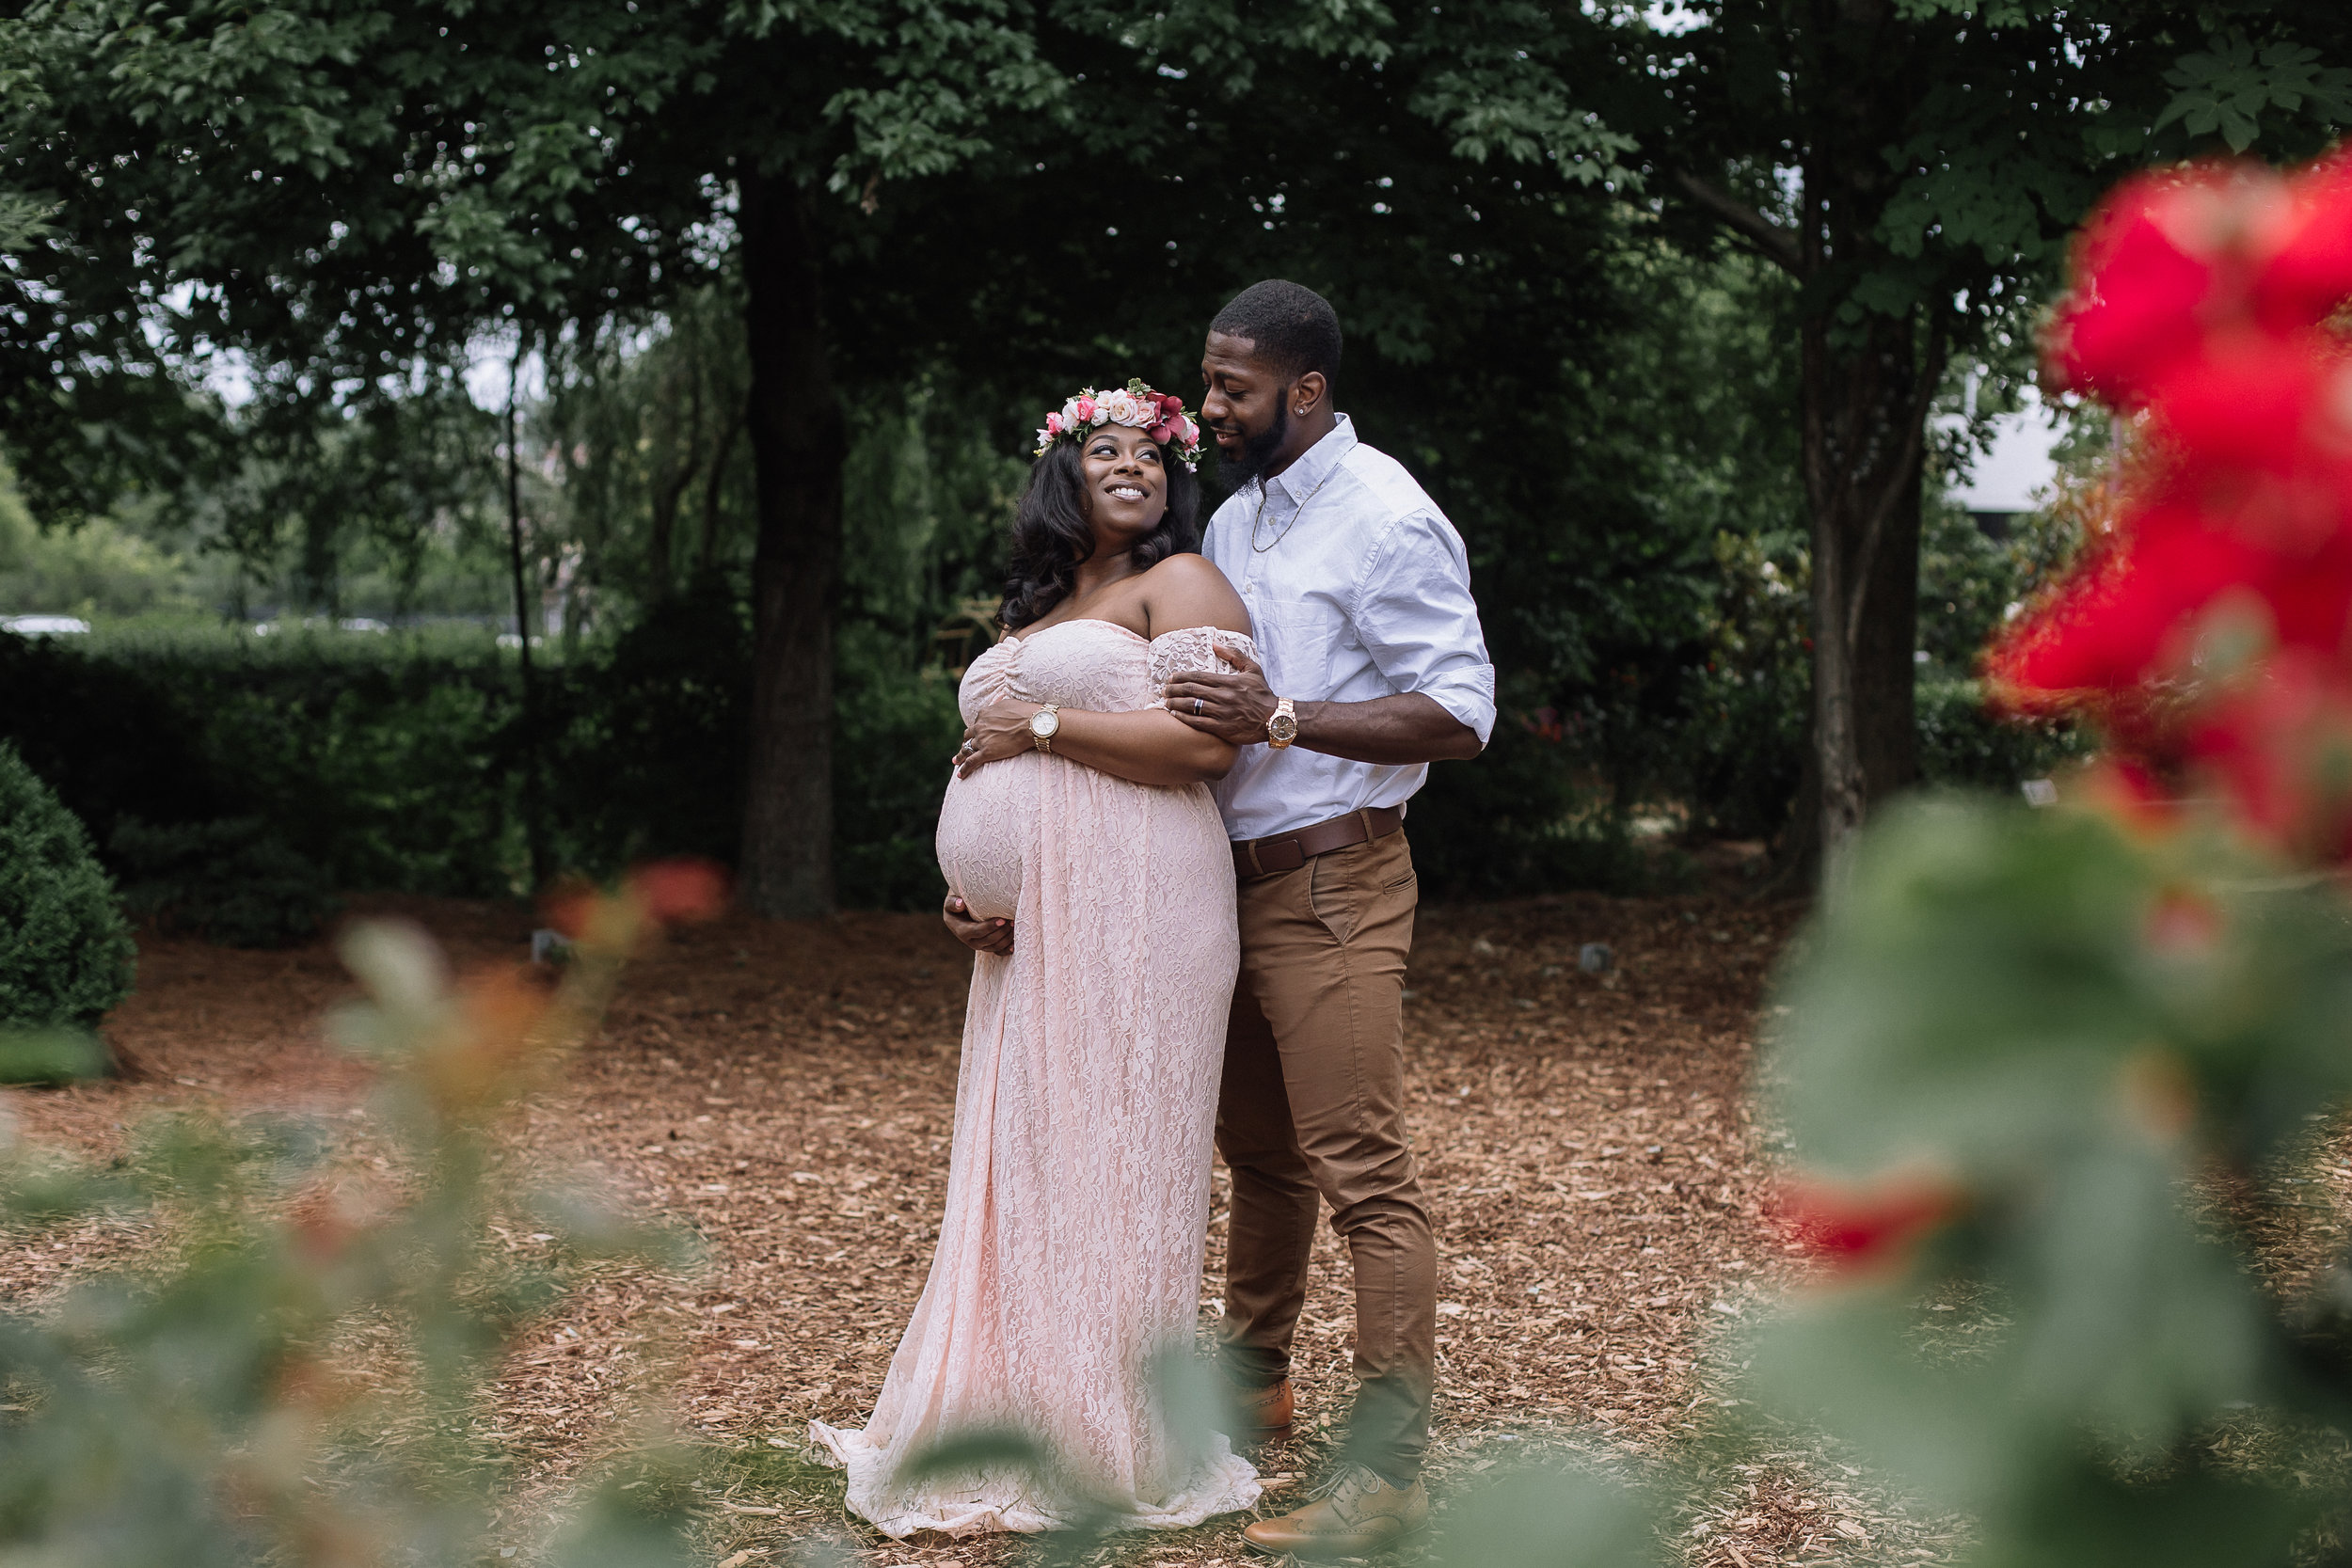 Maternity Session at McGill Rose Garden